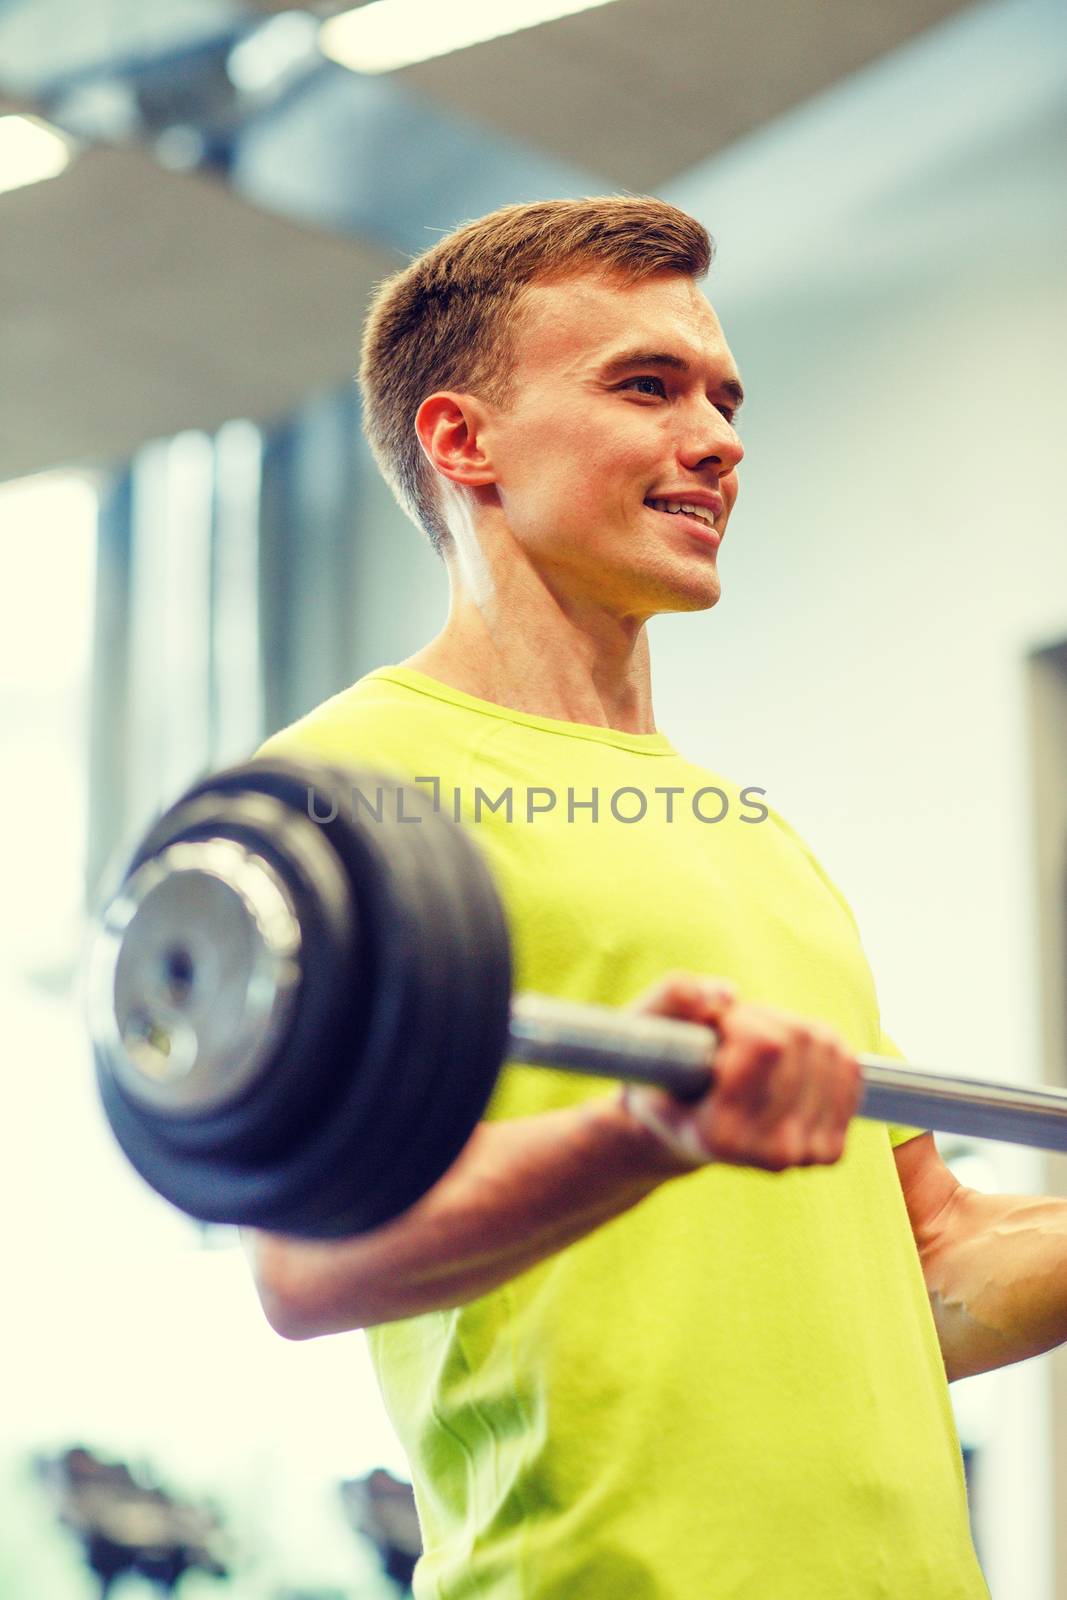 smiling man doing exercise with barbell in gym by dolgachov